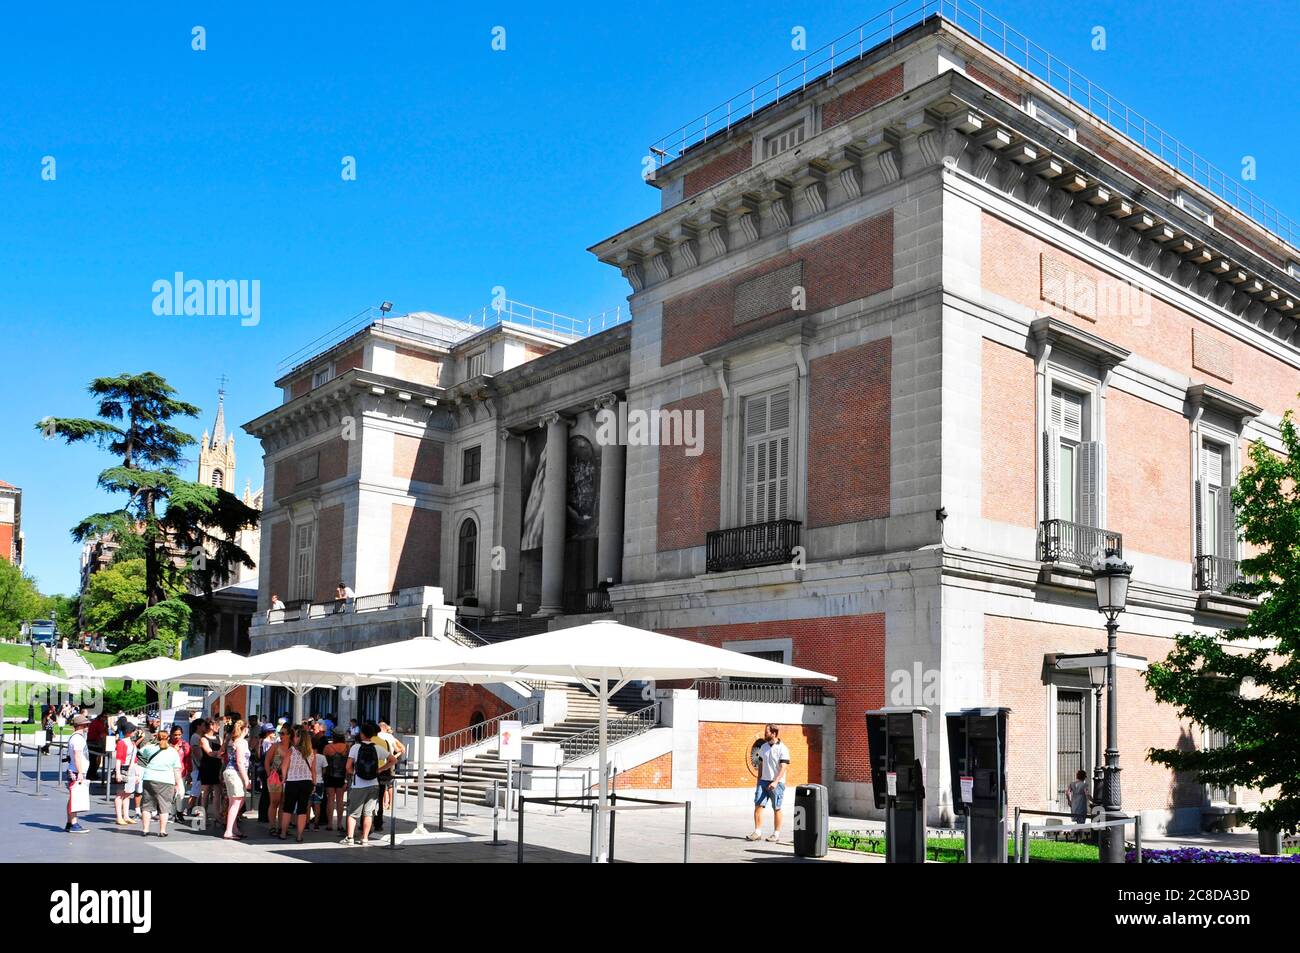 MADRID, SPAIN - AUGUST 10: People at the entrance of the Museo del Prado on August 10, 2014 in Madrid, Spain. The Museo del Prado is the main national Stock Photo